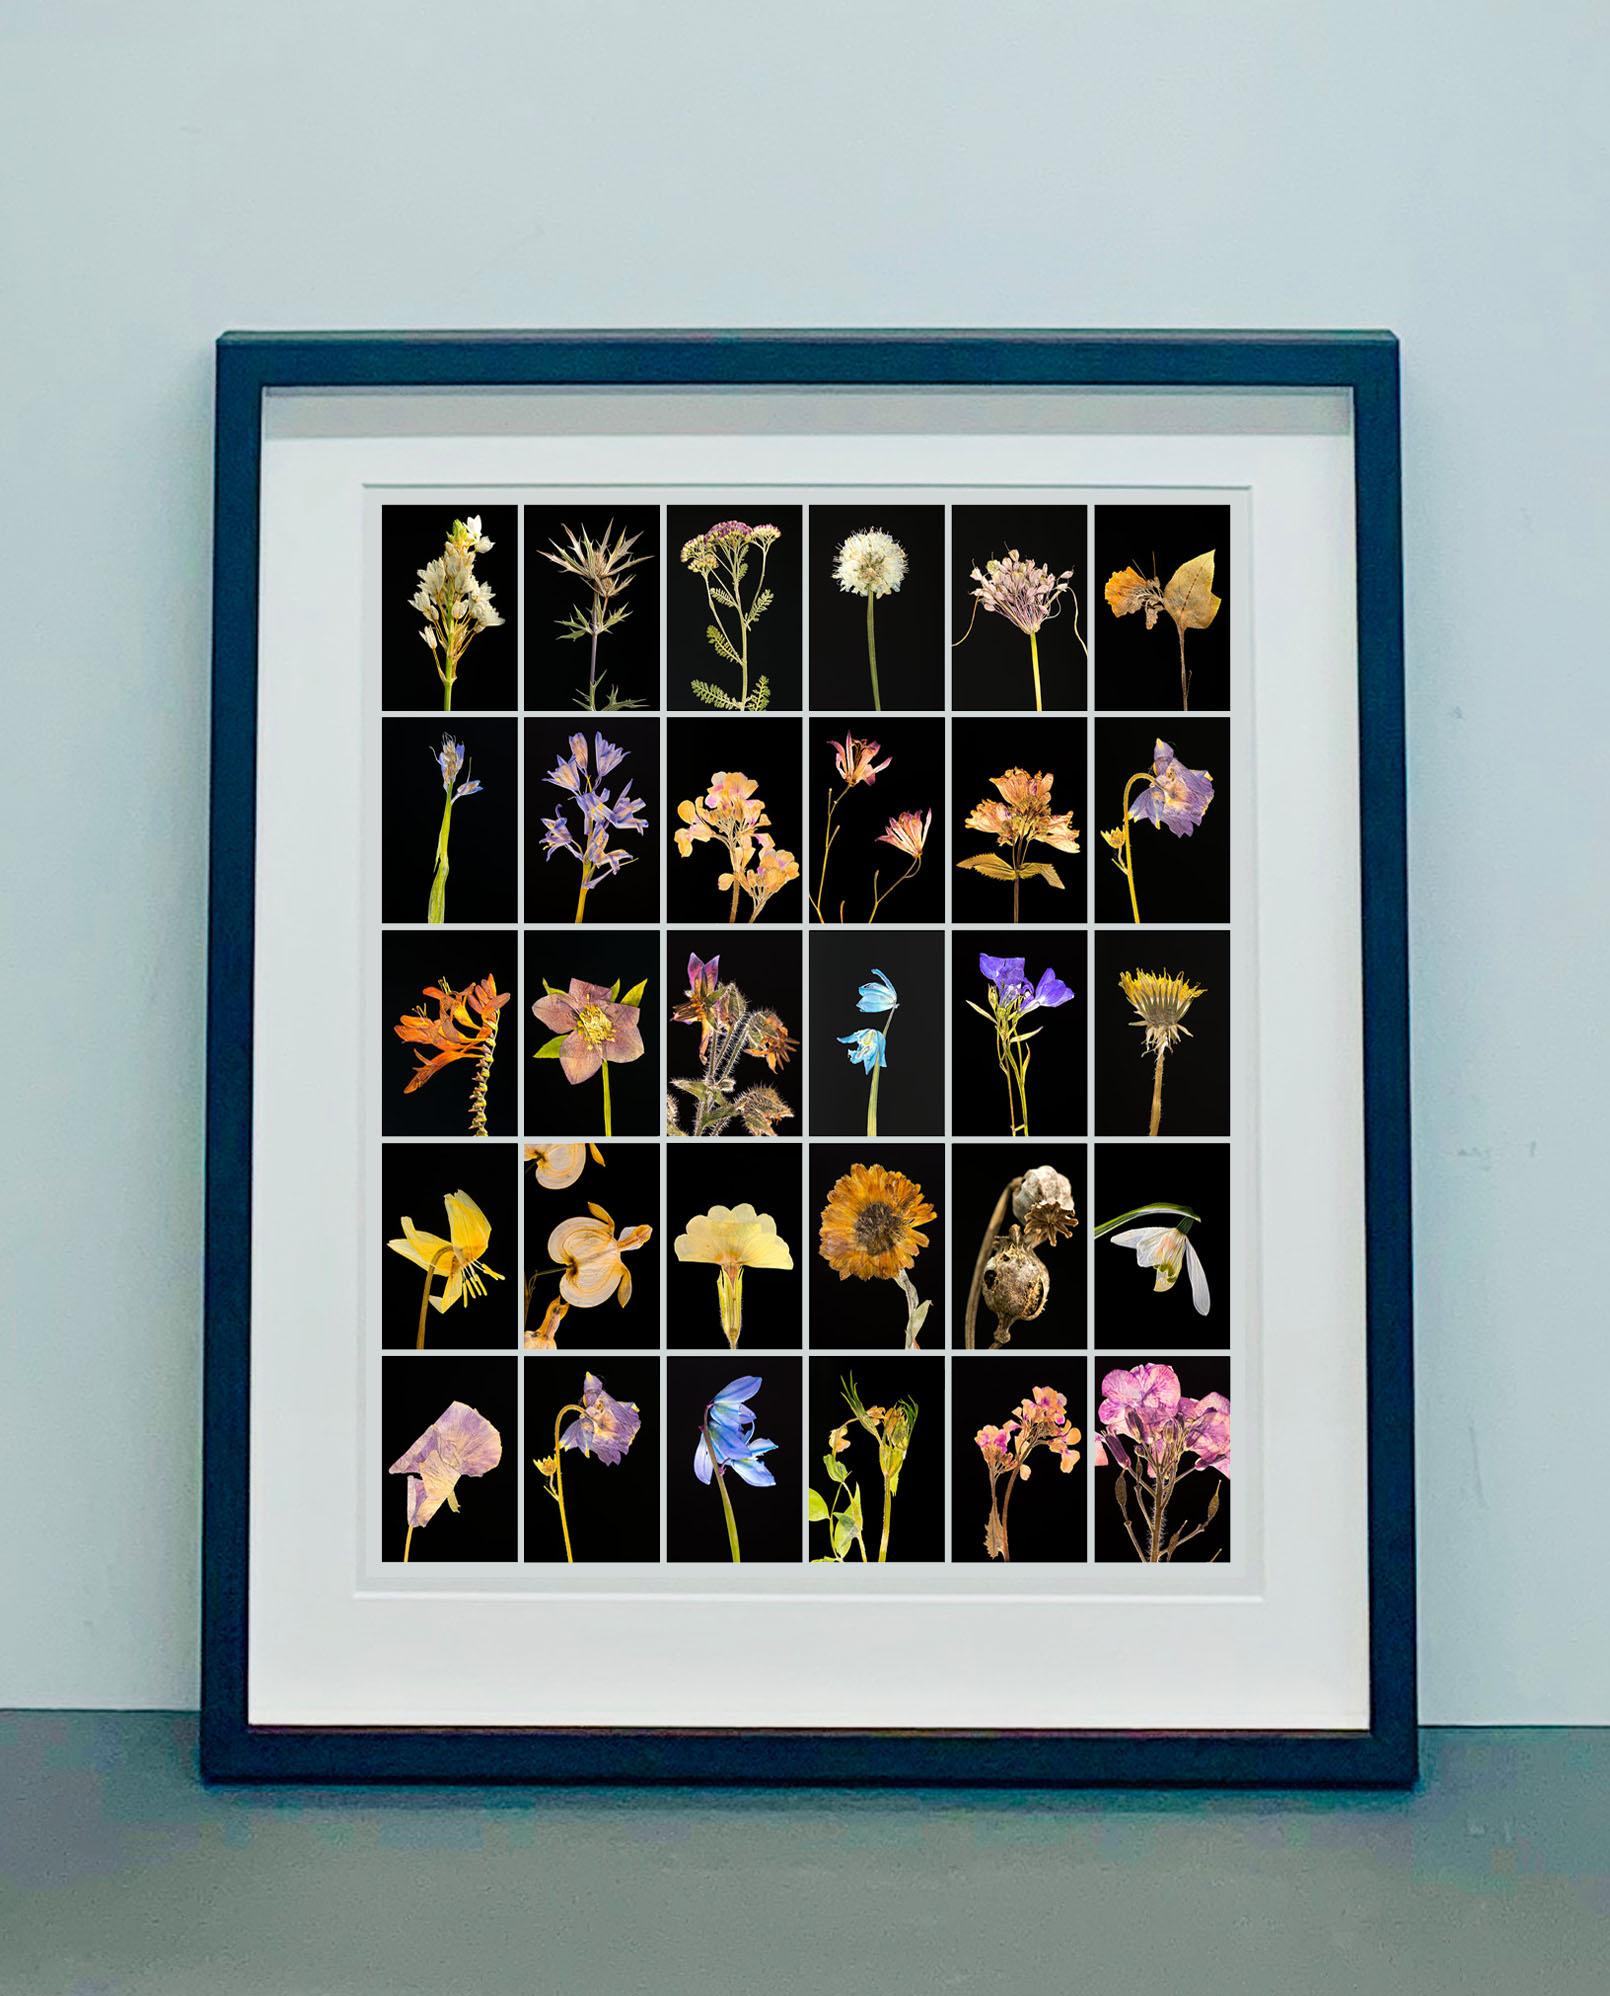 Martin’s innovative photographs are created from plants grown by himself in his garden and greenhouse in Cambridge. A keen horticulturist, he cultivates his own plants and flowers, the source of his art. His passion for gardening and a technical